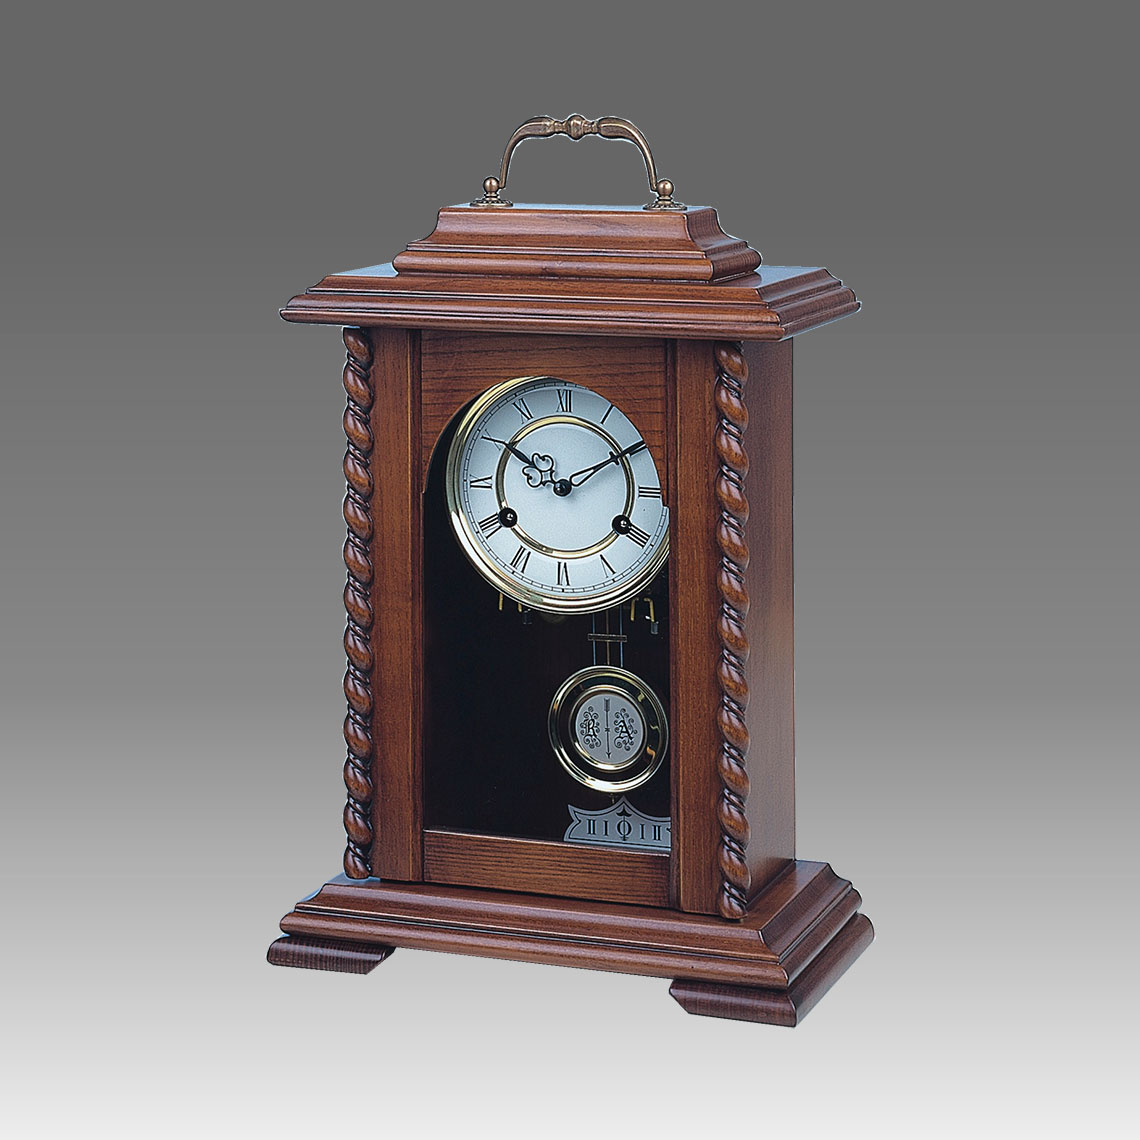 Mante Clock, Table Clock, Cimn Clock, Art.328/2 walnut - Bim Bam melody on coil gong, White dial with roman number serigrafy